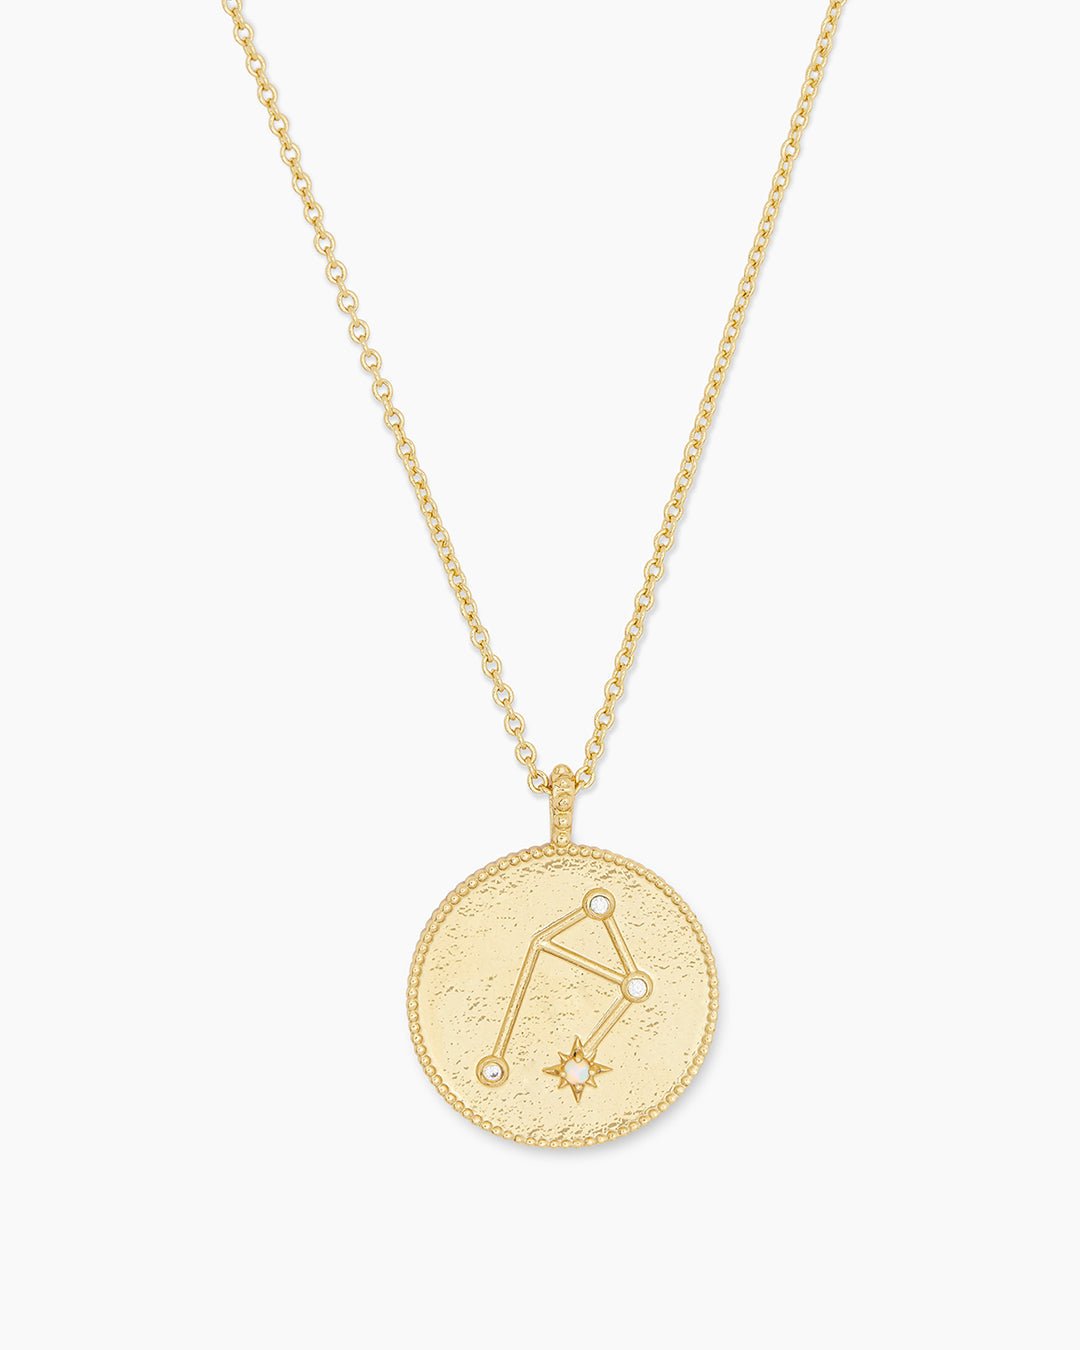  Astrology Coin Necklace (Libra) || option::Gold Plated, Libra